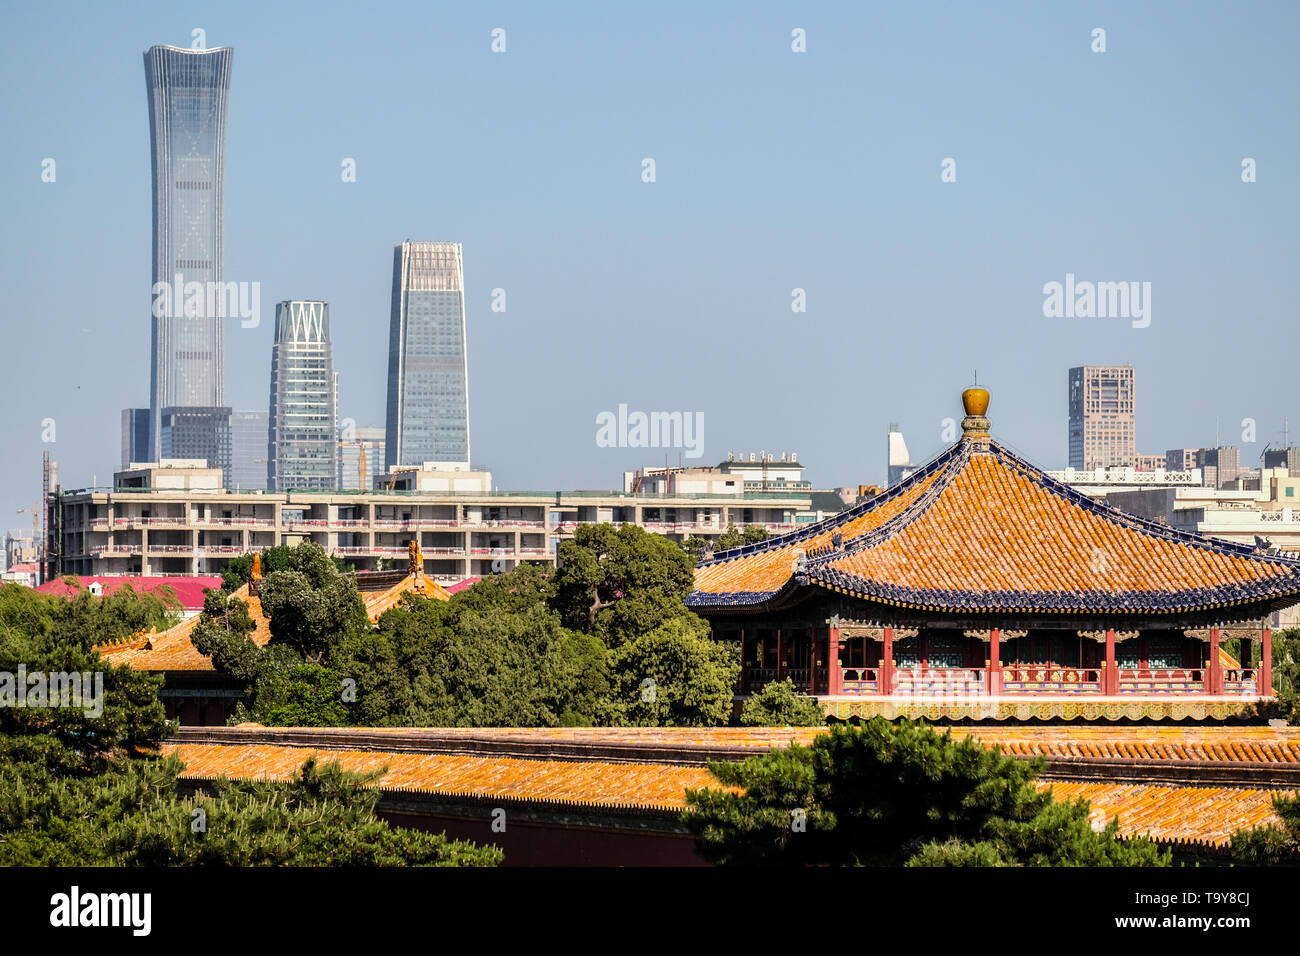 High Rise Modern Build Mixed with Forbidden City in Beijing China Stock Photo